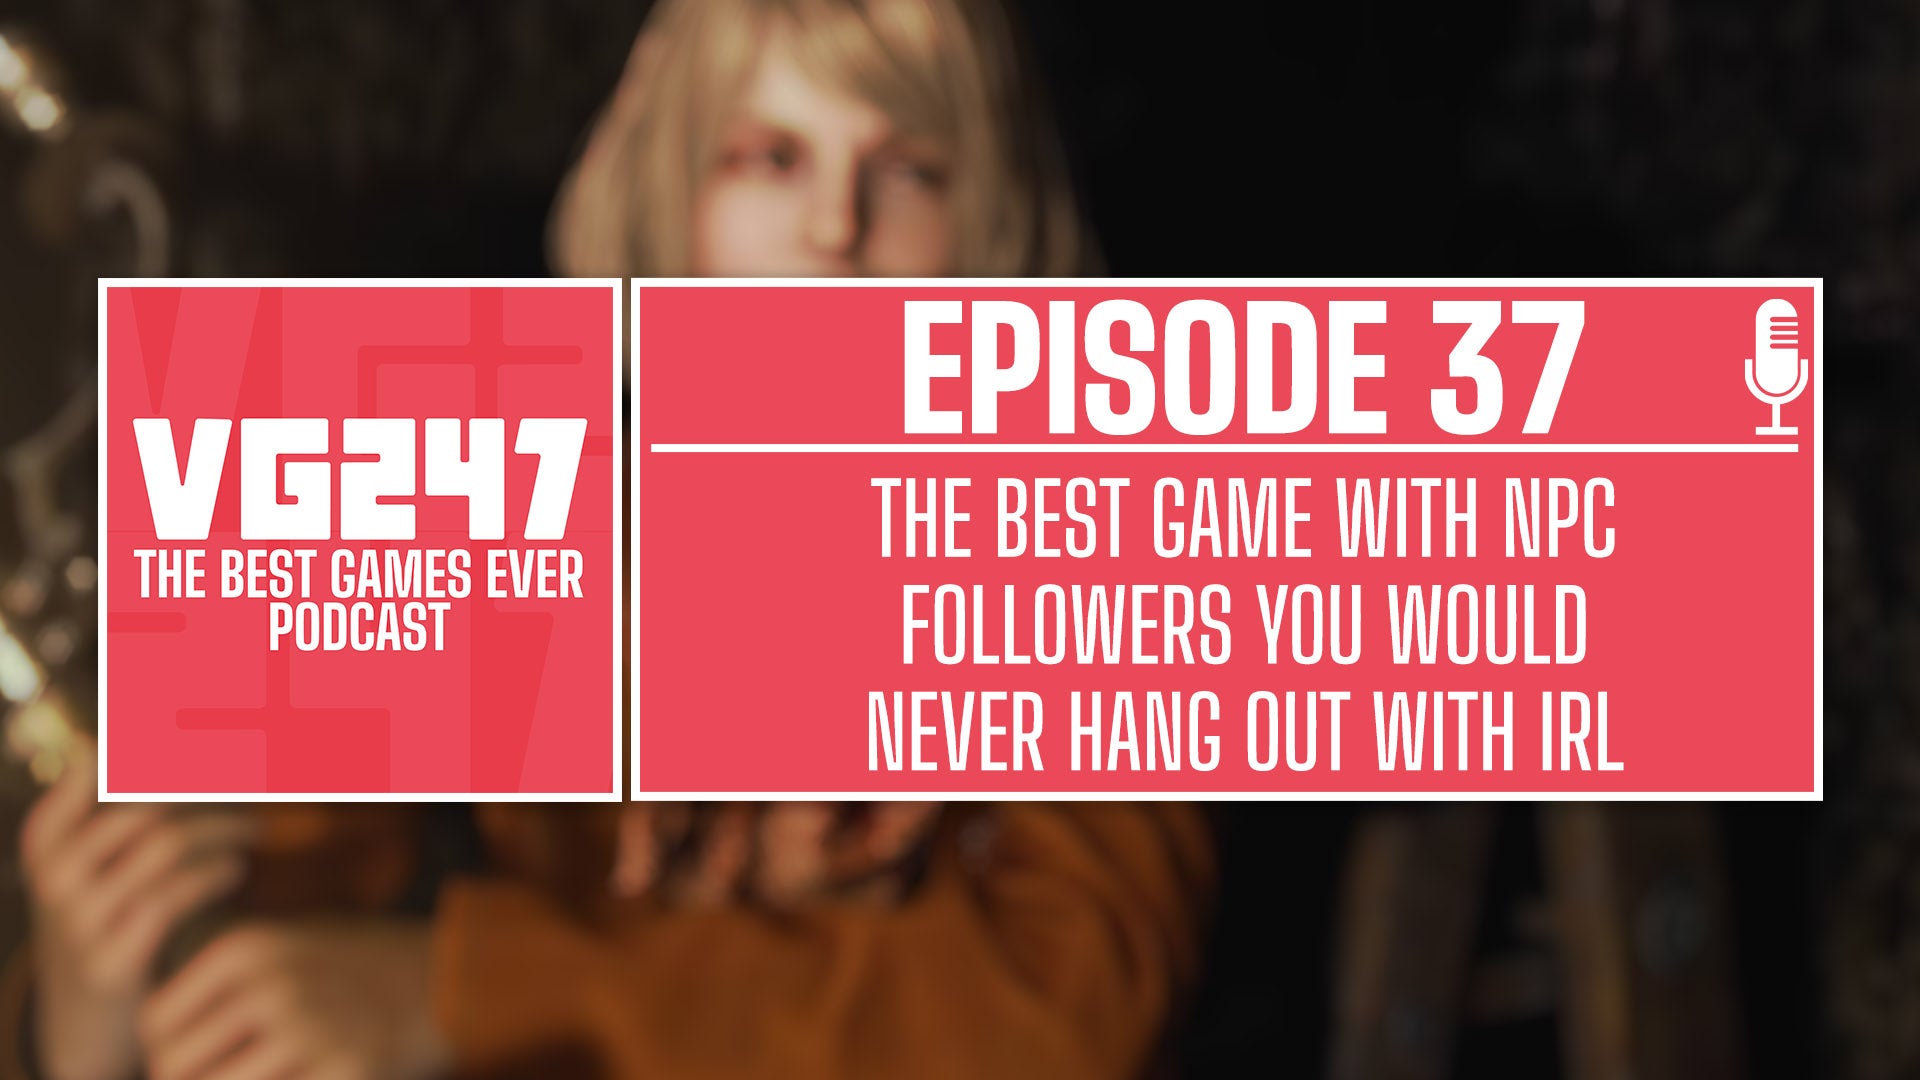 Image for VG247's The Best Games Ever Podcast – Ep.37: The best game with followers you would never hang out with IRL